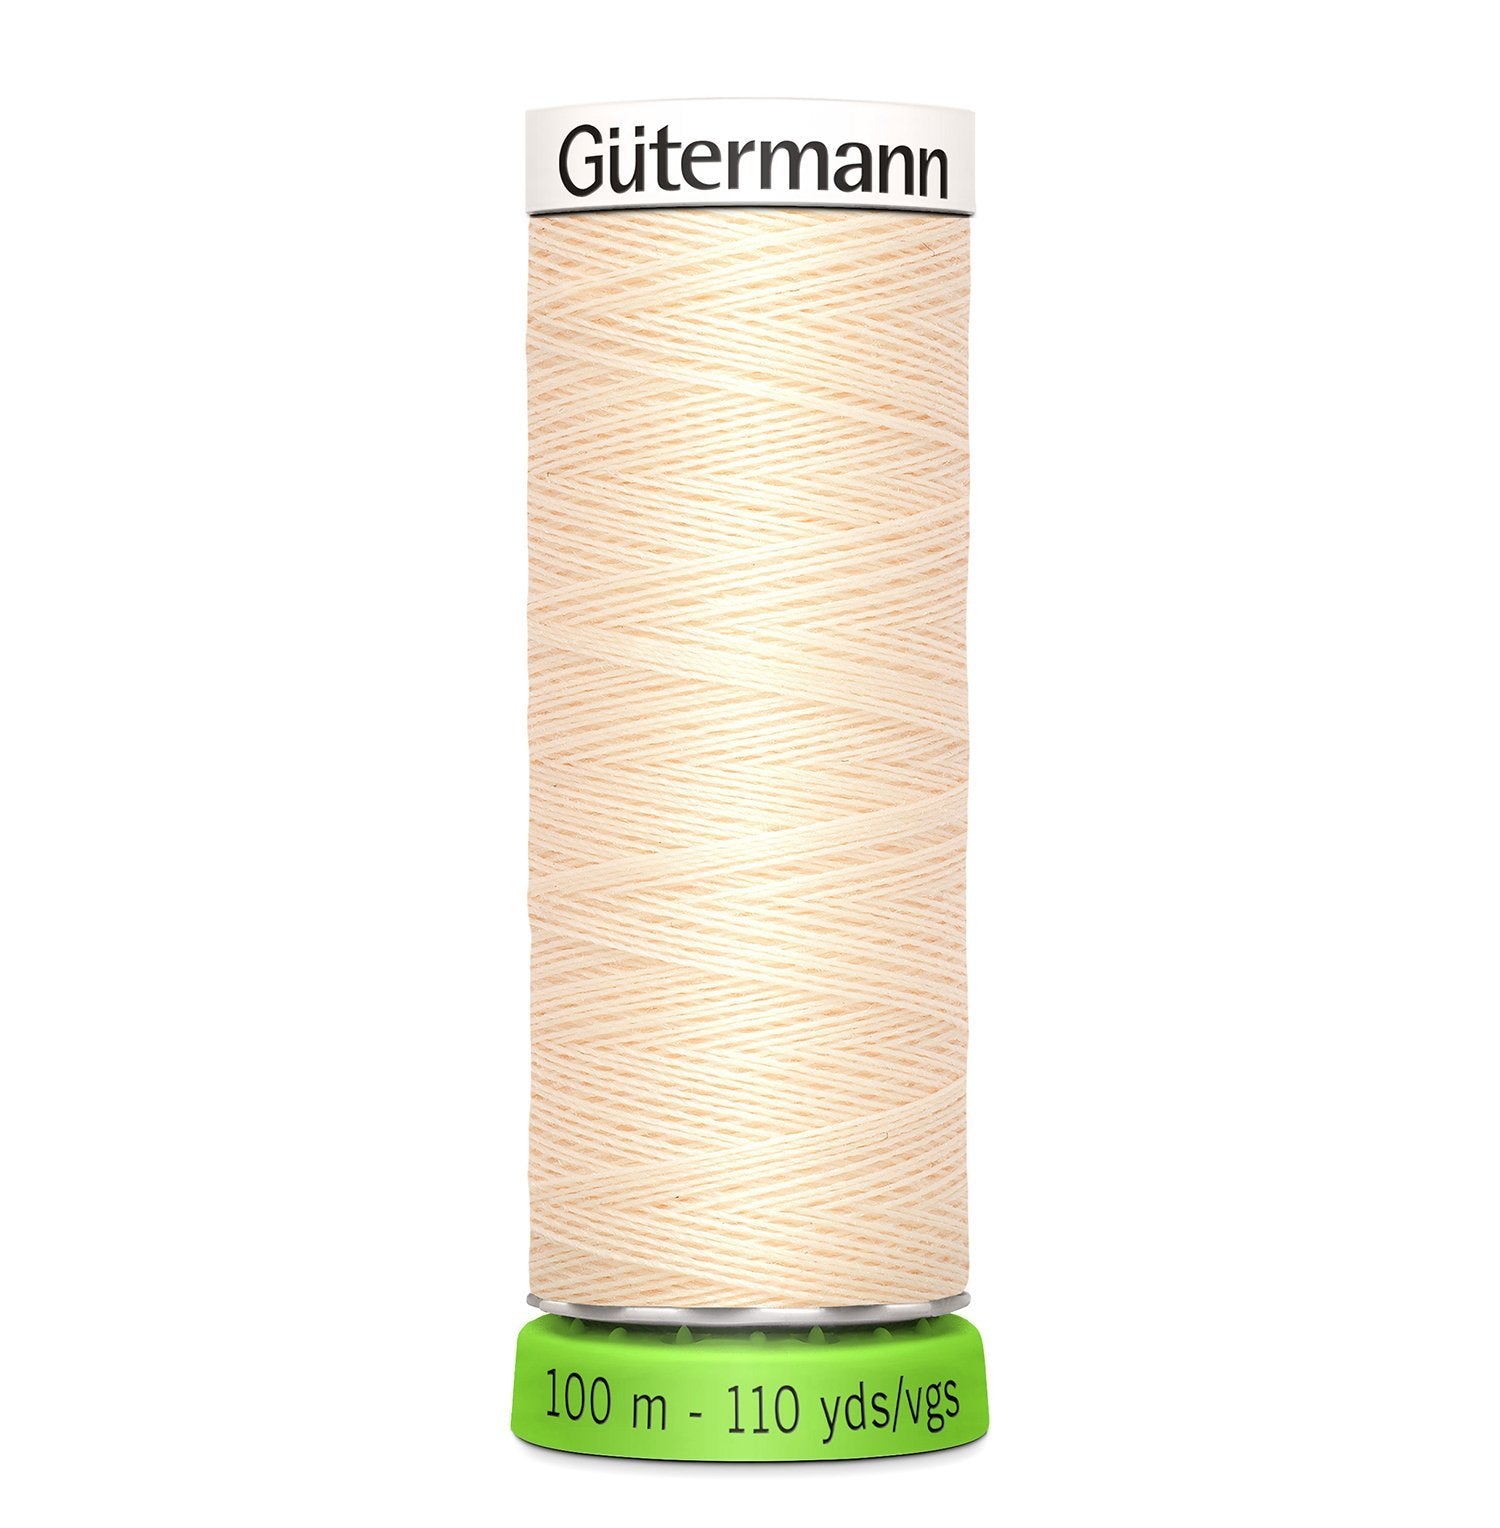 Gutermann Recycled Thread 100m, Colour 414 from Jaycotts Sewing Supplies